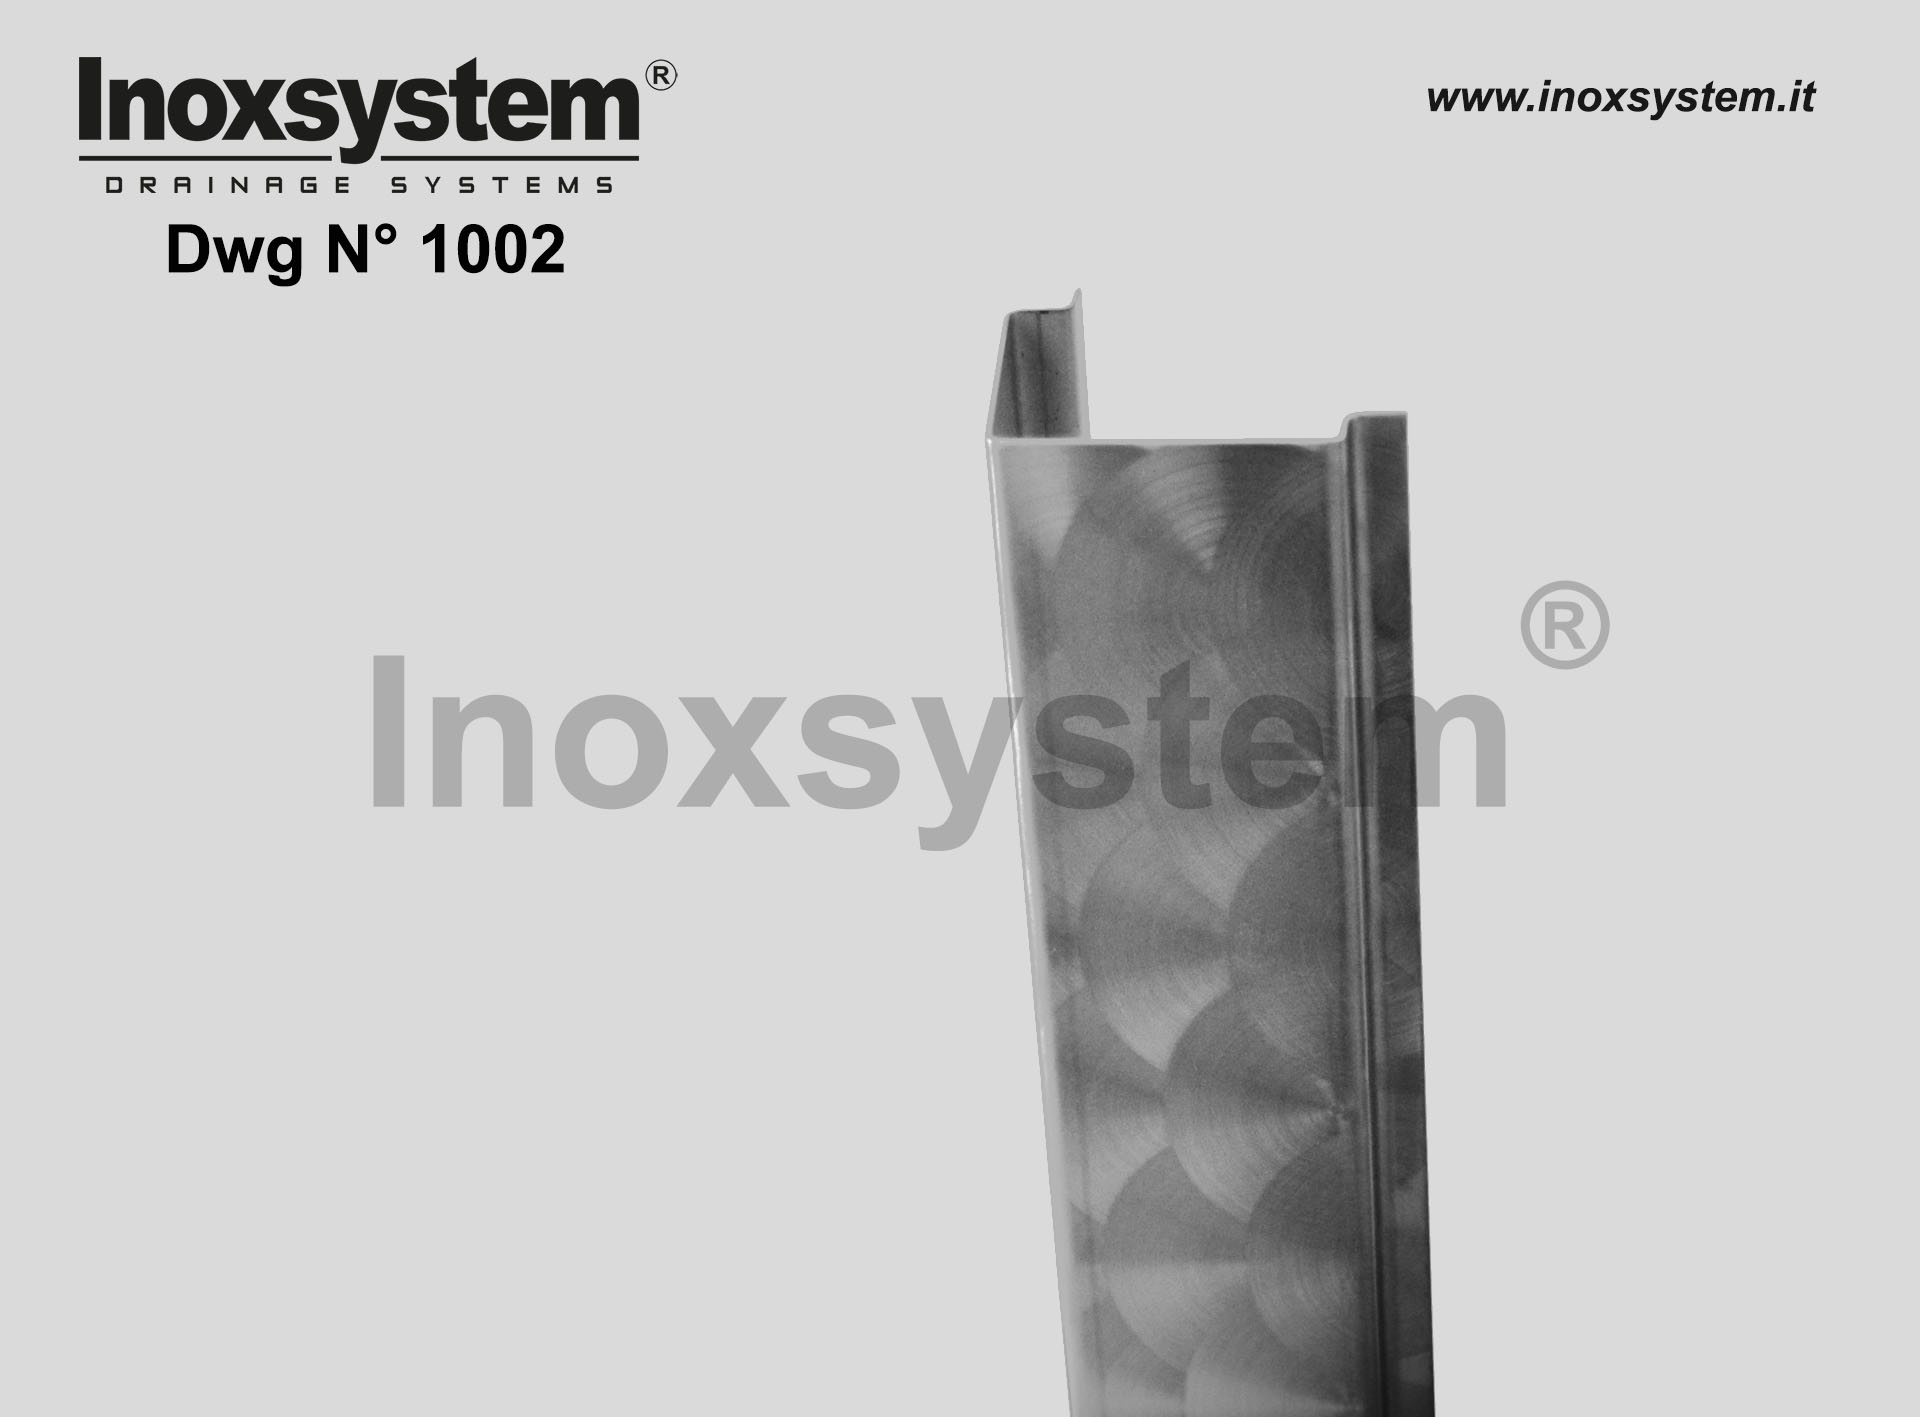 Stainless steel solid bend outer corner guards with impost for tiles